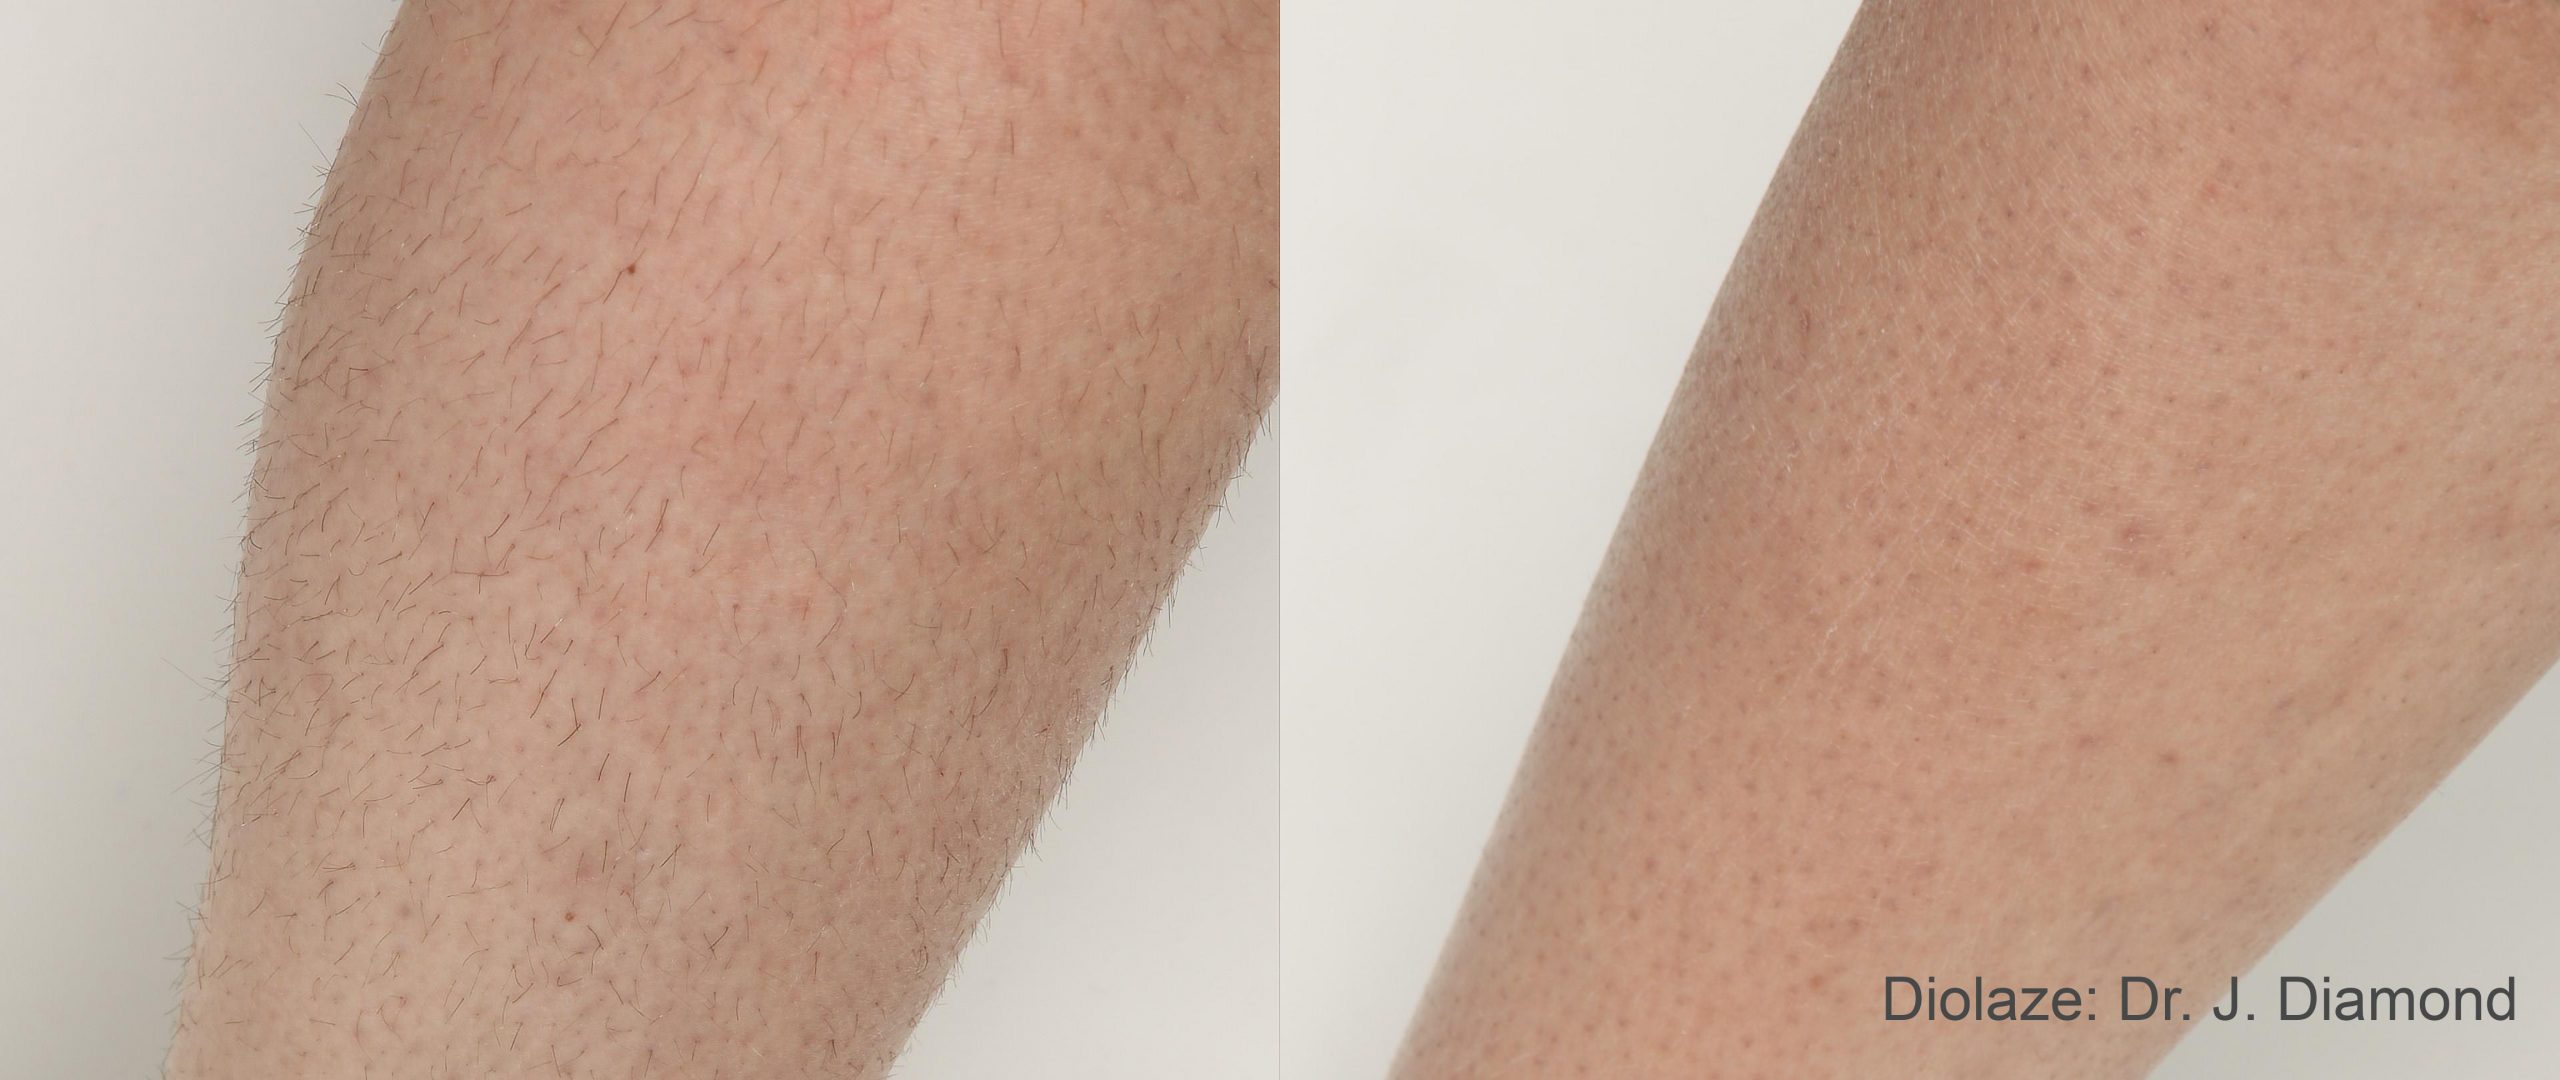 Diolaze laser hair removal